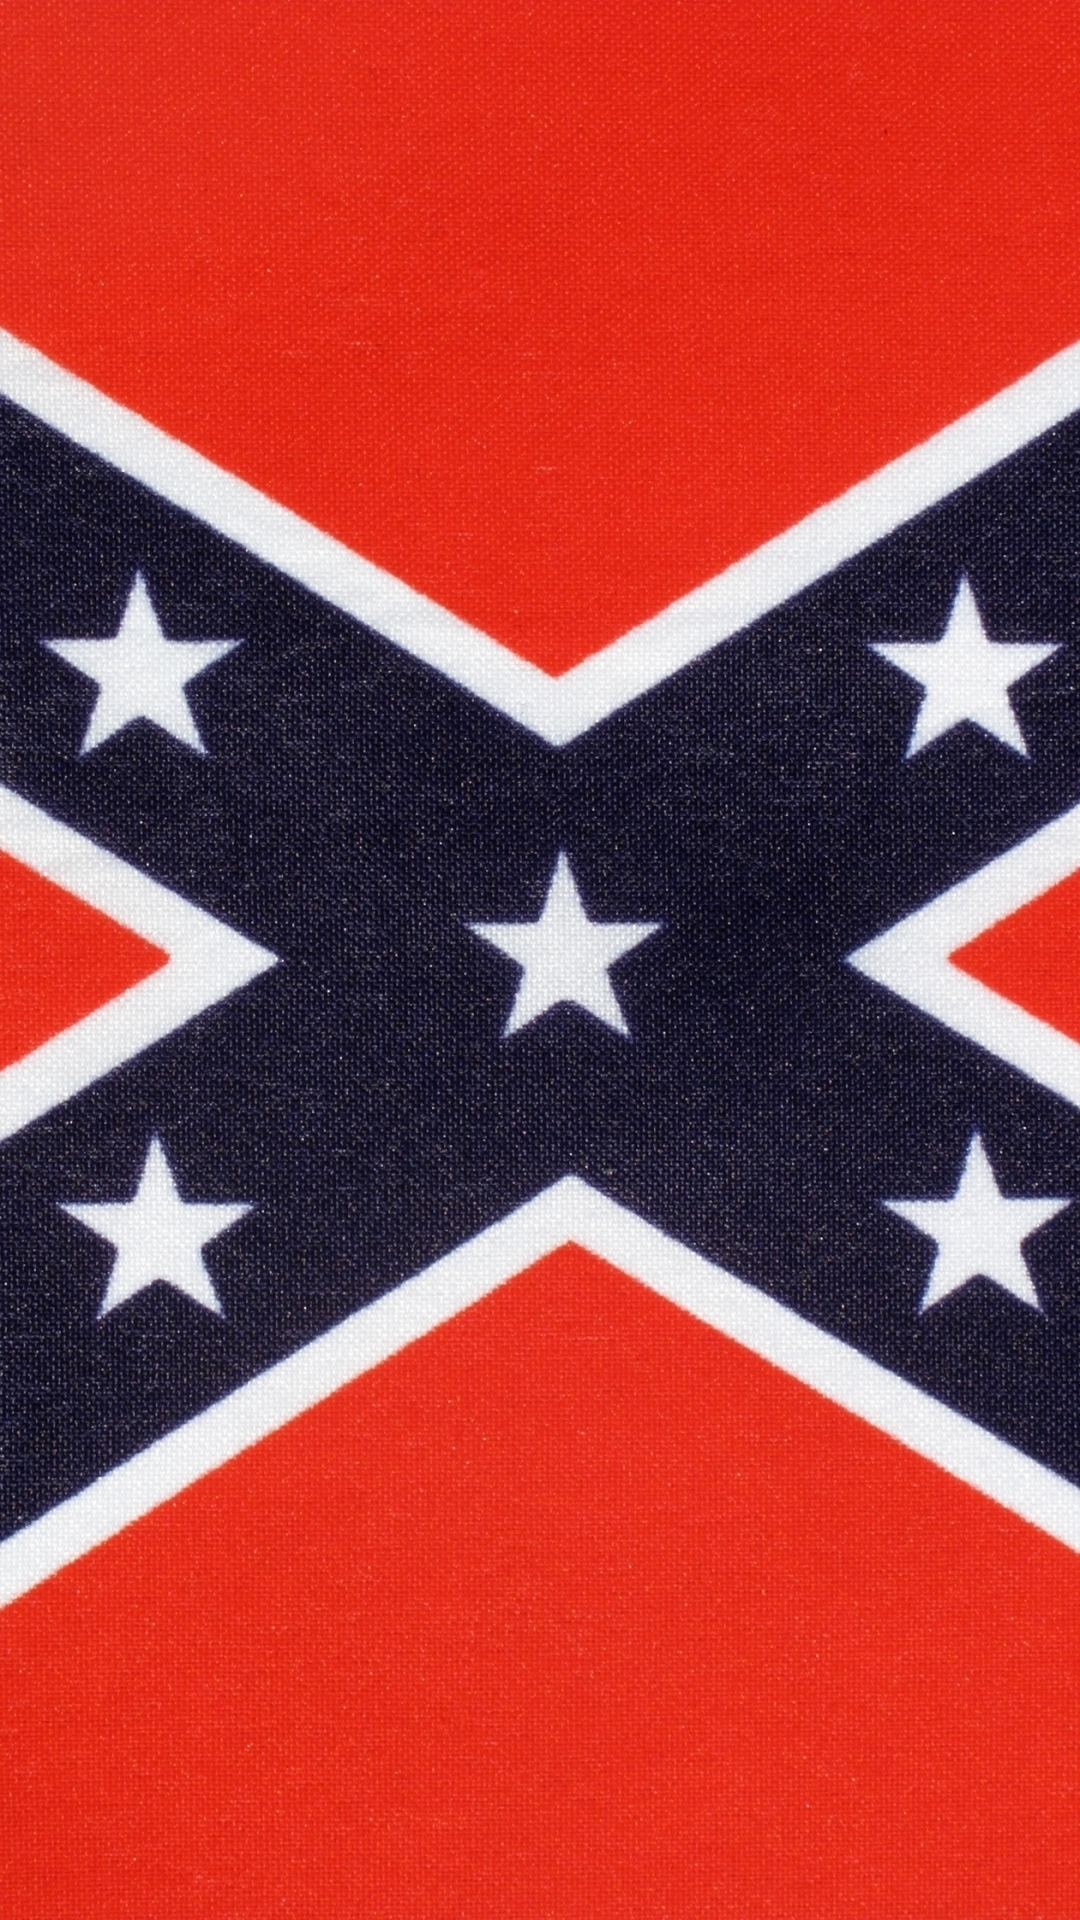 10 Top Confederate Flag Iphone Wallpaper FULL HD 1920×1080 For PC Background